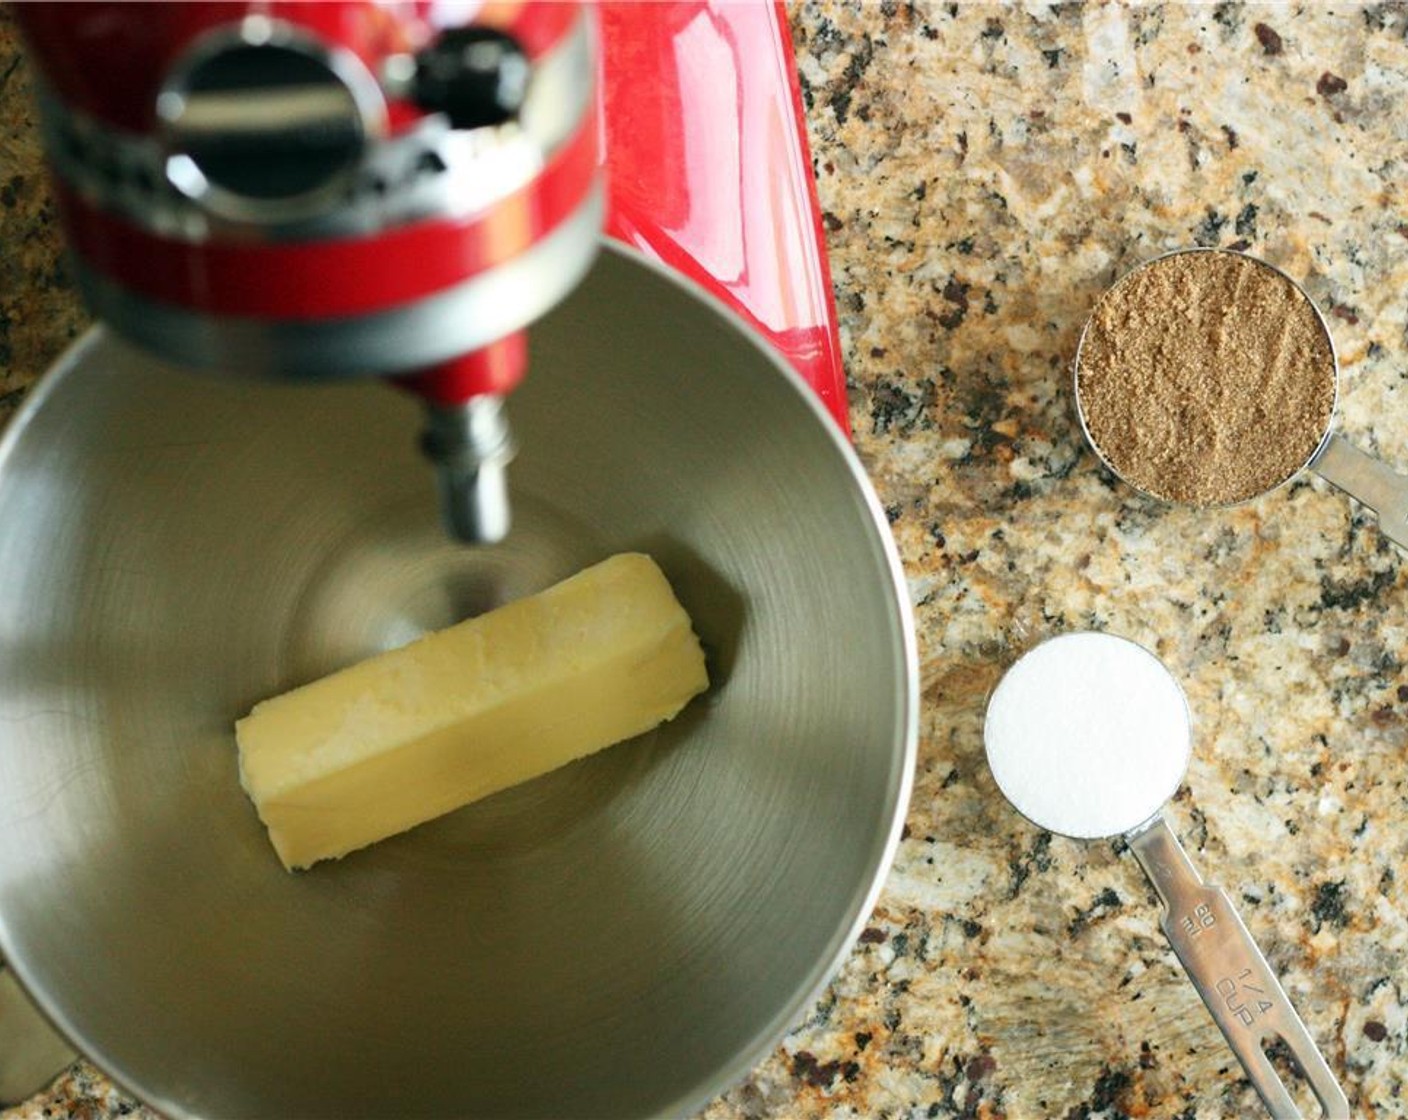 step 2 Combine Dark Brown Sugar (1/2 cup), Granulated Sugar (1/4 cup), and Unsalted Butter (1/2 cup) in the bowl of a standing mixer or other medium mixing bowl.